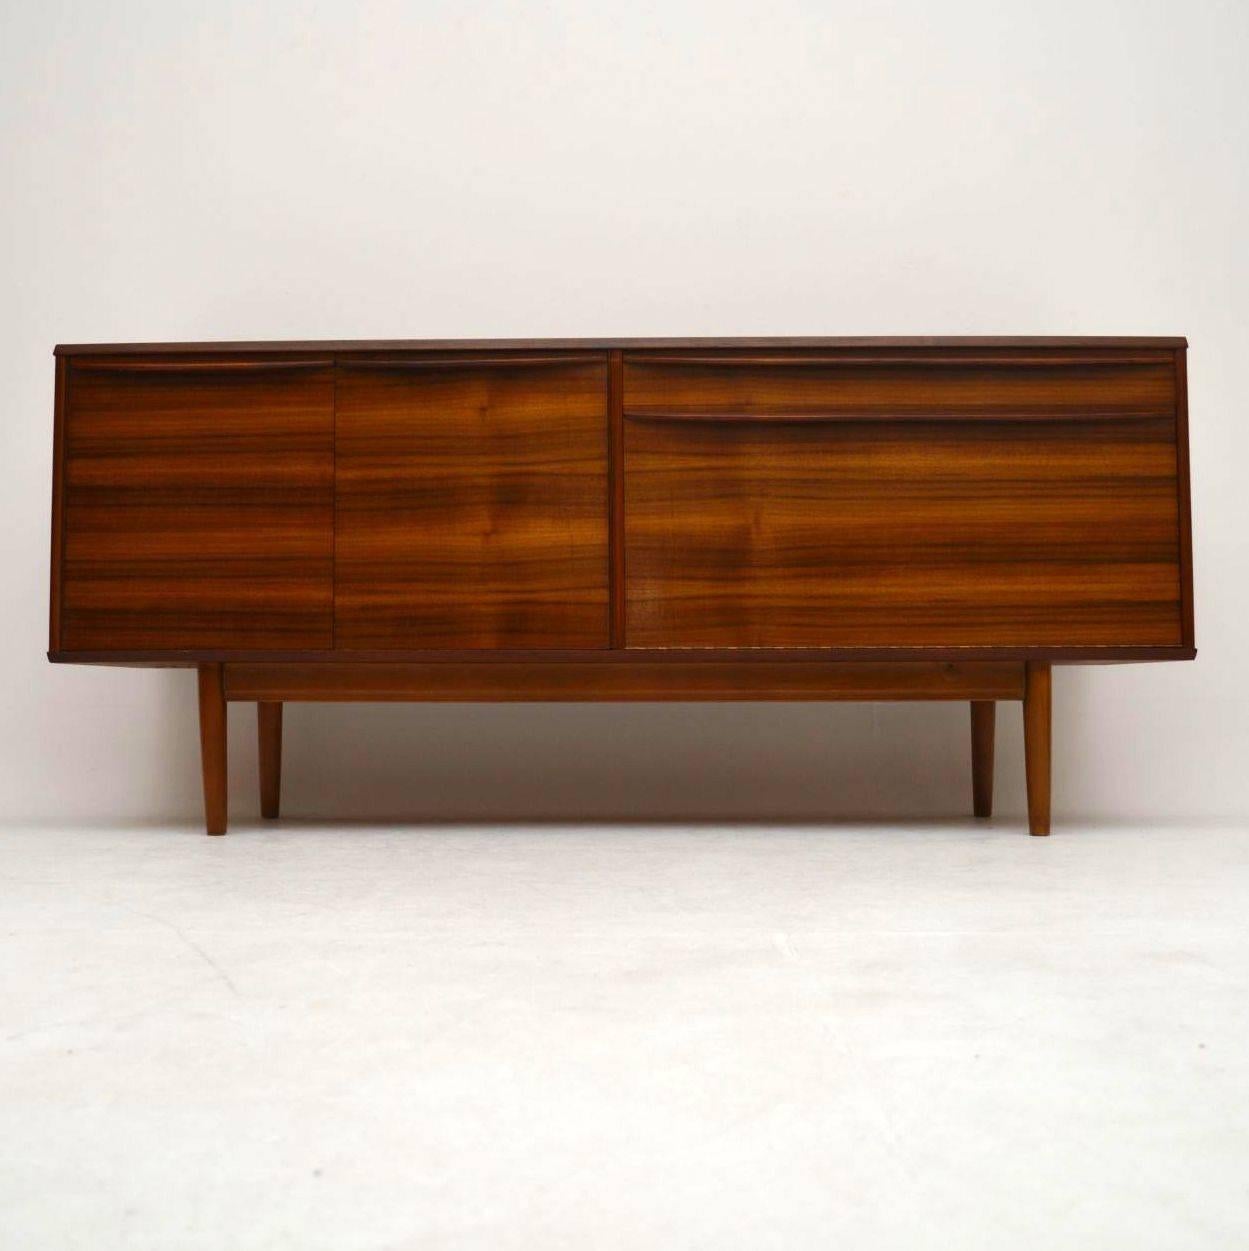 A beautifully designed and top quality sideboard in walnut, this dates from the 1960s, it was made by Morris of Glasgow. The condition is superb throughout, with hardly any wear to be seen. It has a lovely color and gorgeous grain patterns; its a